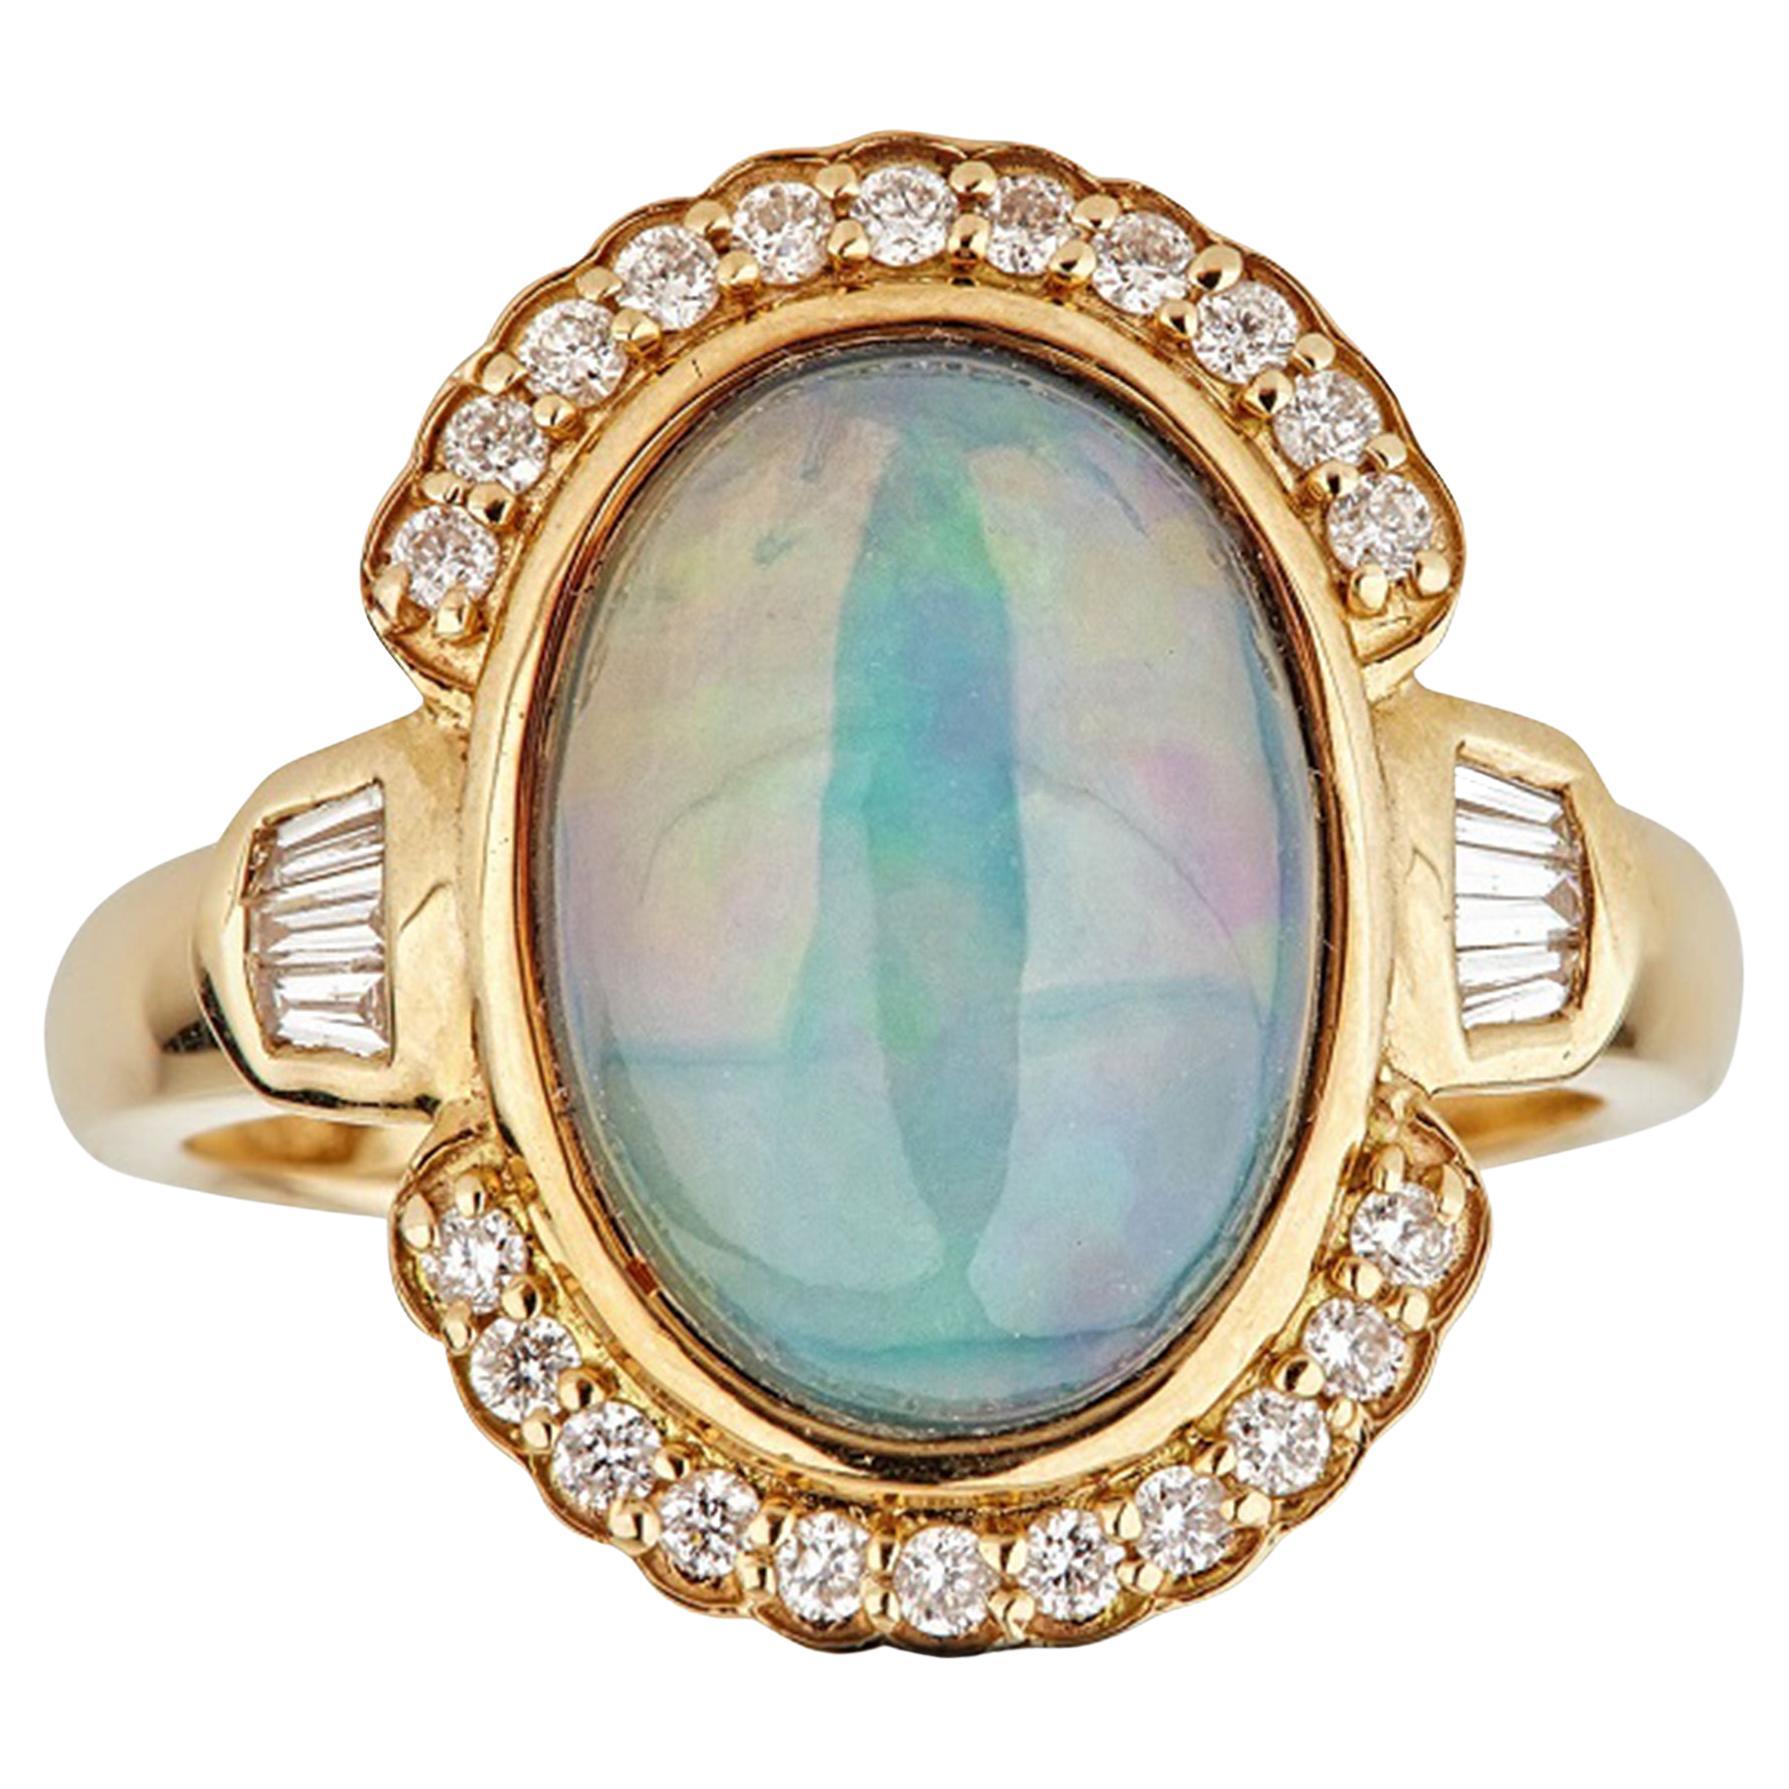 4.38 Carat Ethiopian Opal Oval Cab Diamond Accents 14K Yellow Gold Ring